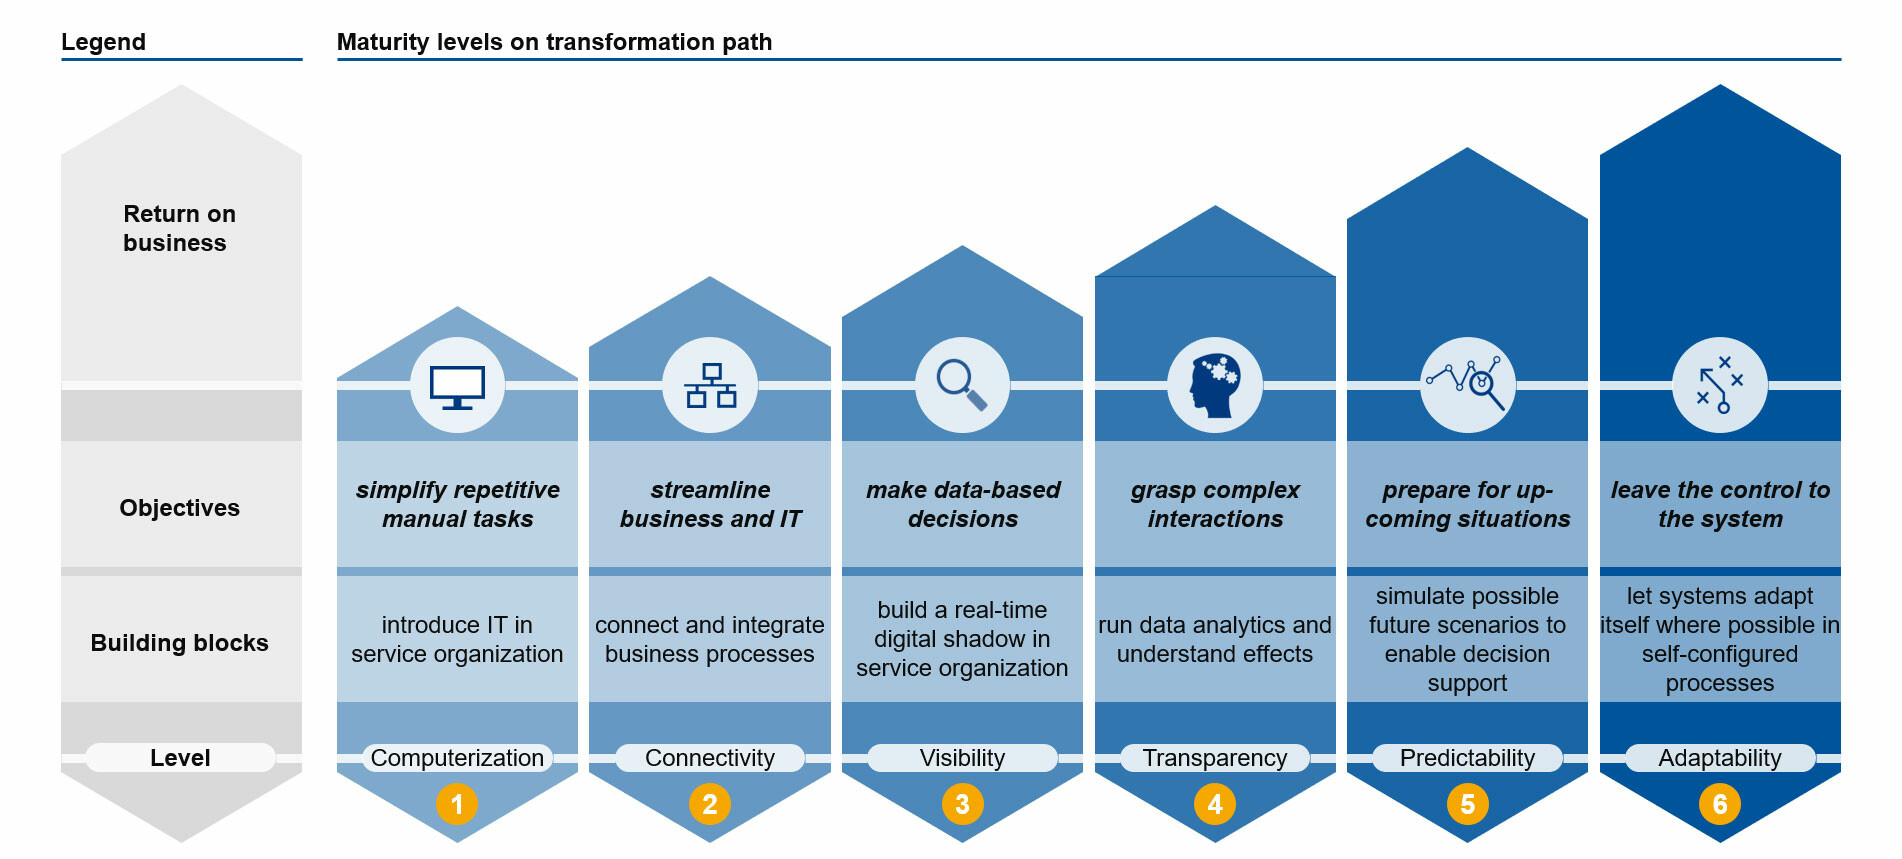 Six maturity levels for the transformation of the service organization